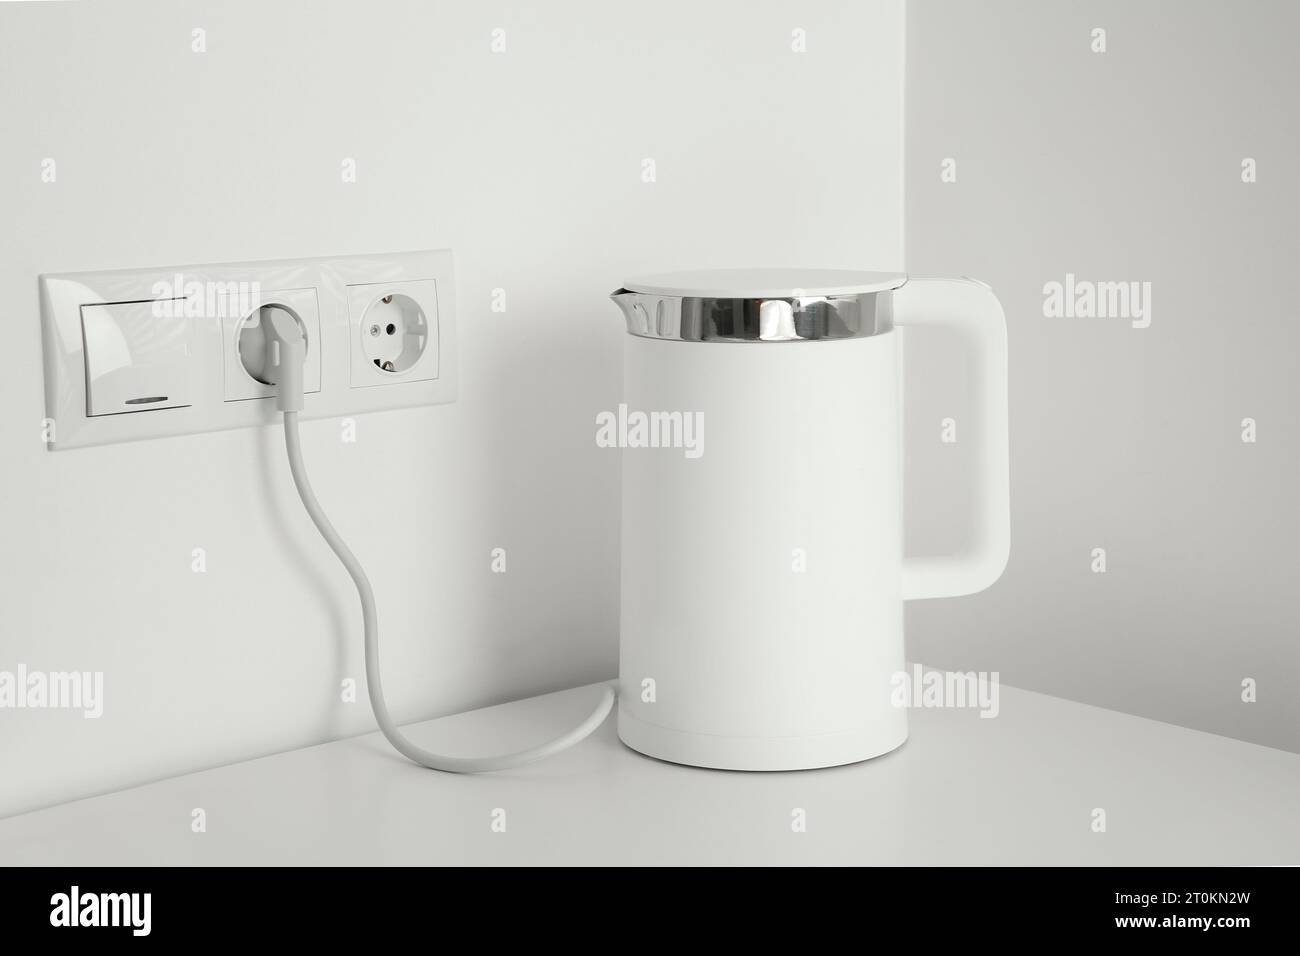 https://c8.alamy.com/comp/2T0KN2W/electric-kettle-plugged-into-power-socket-on-white-wall-2T0KN2W.jpg